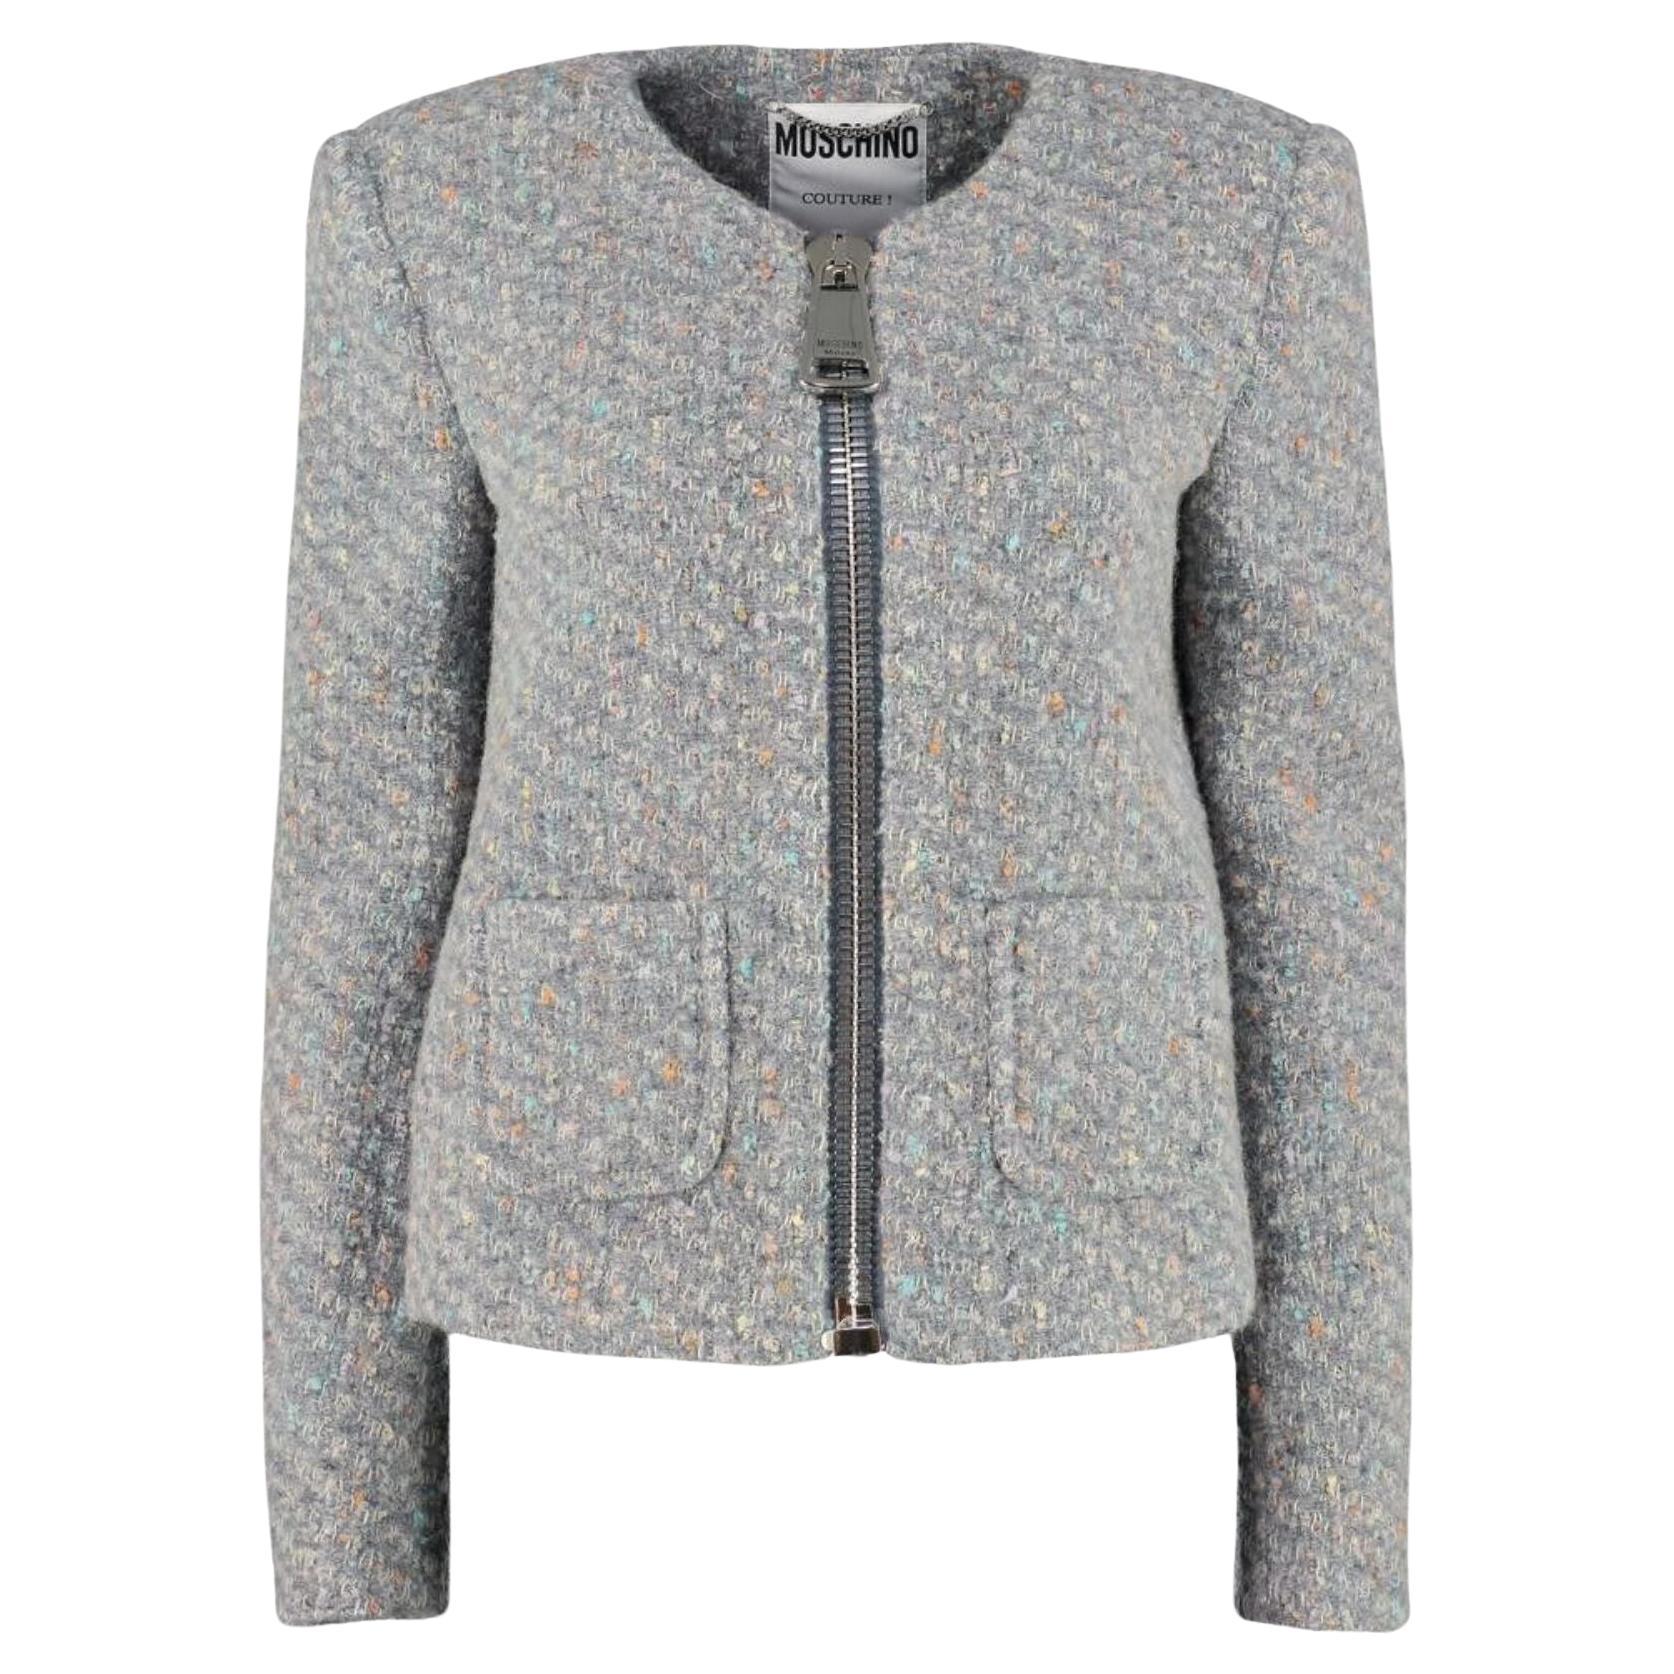 AW20 Moschino Couture Boucle Wool Jacket by Jeremy Scott, Size US 8 For Sale